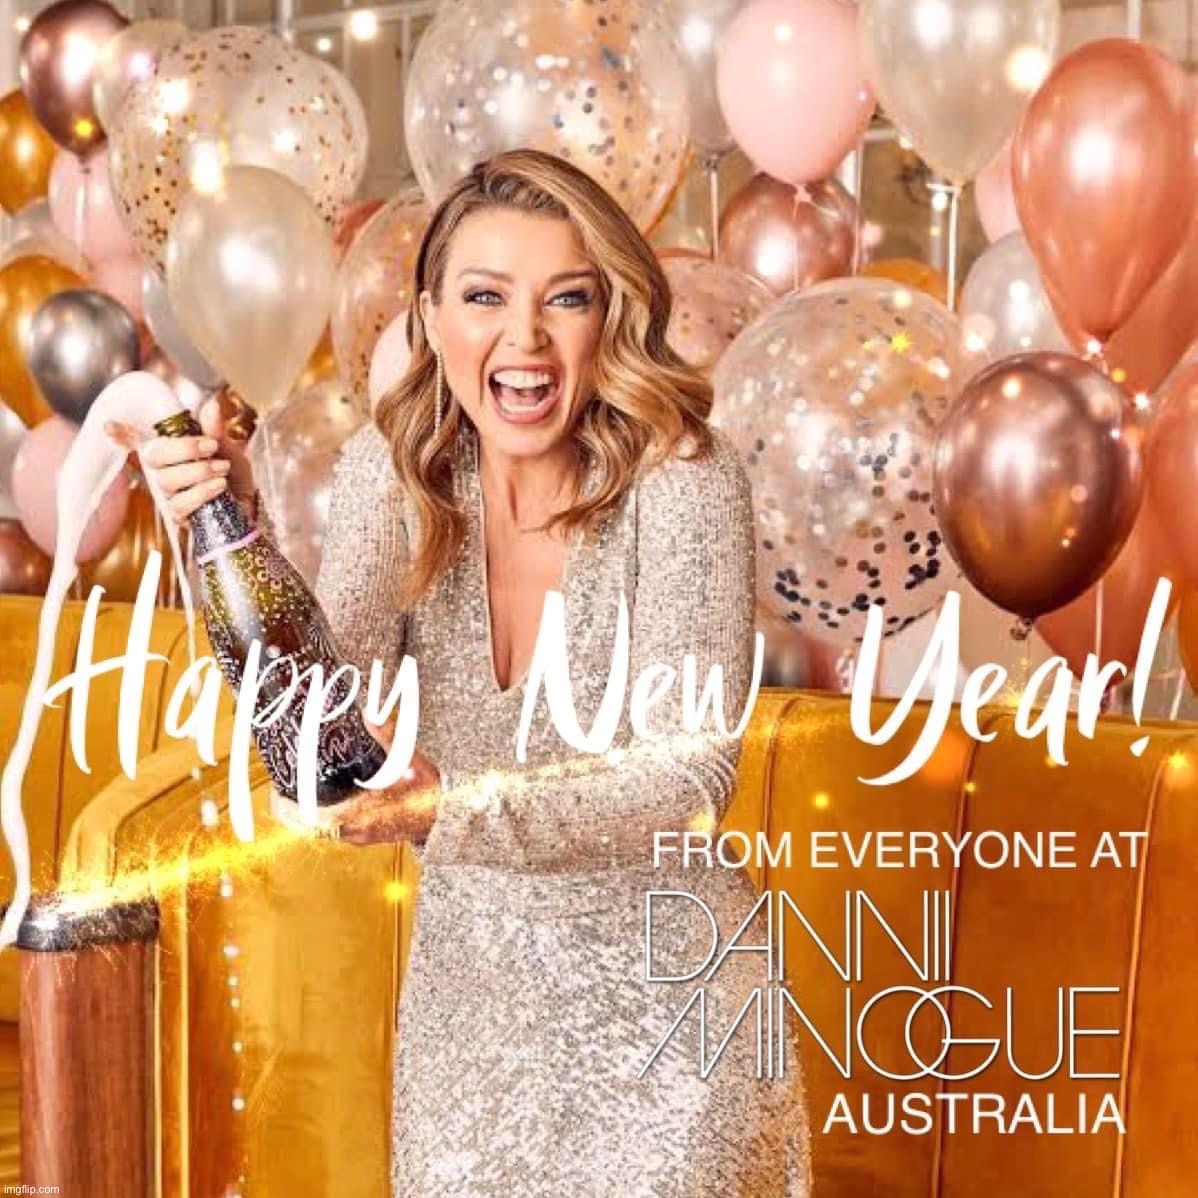 Dannii Minogue happy new year | image tagged in dannii minogue happy new year | made w/ Imgflip meme maker